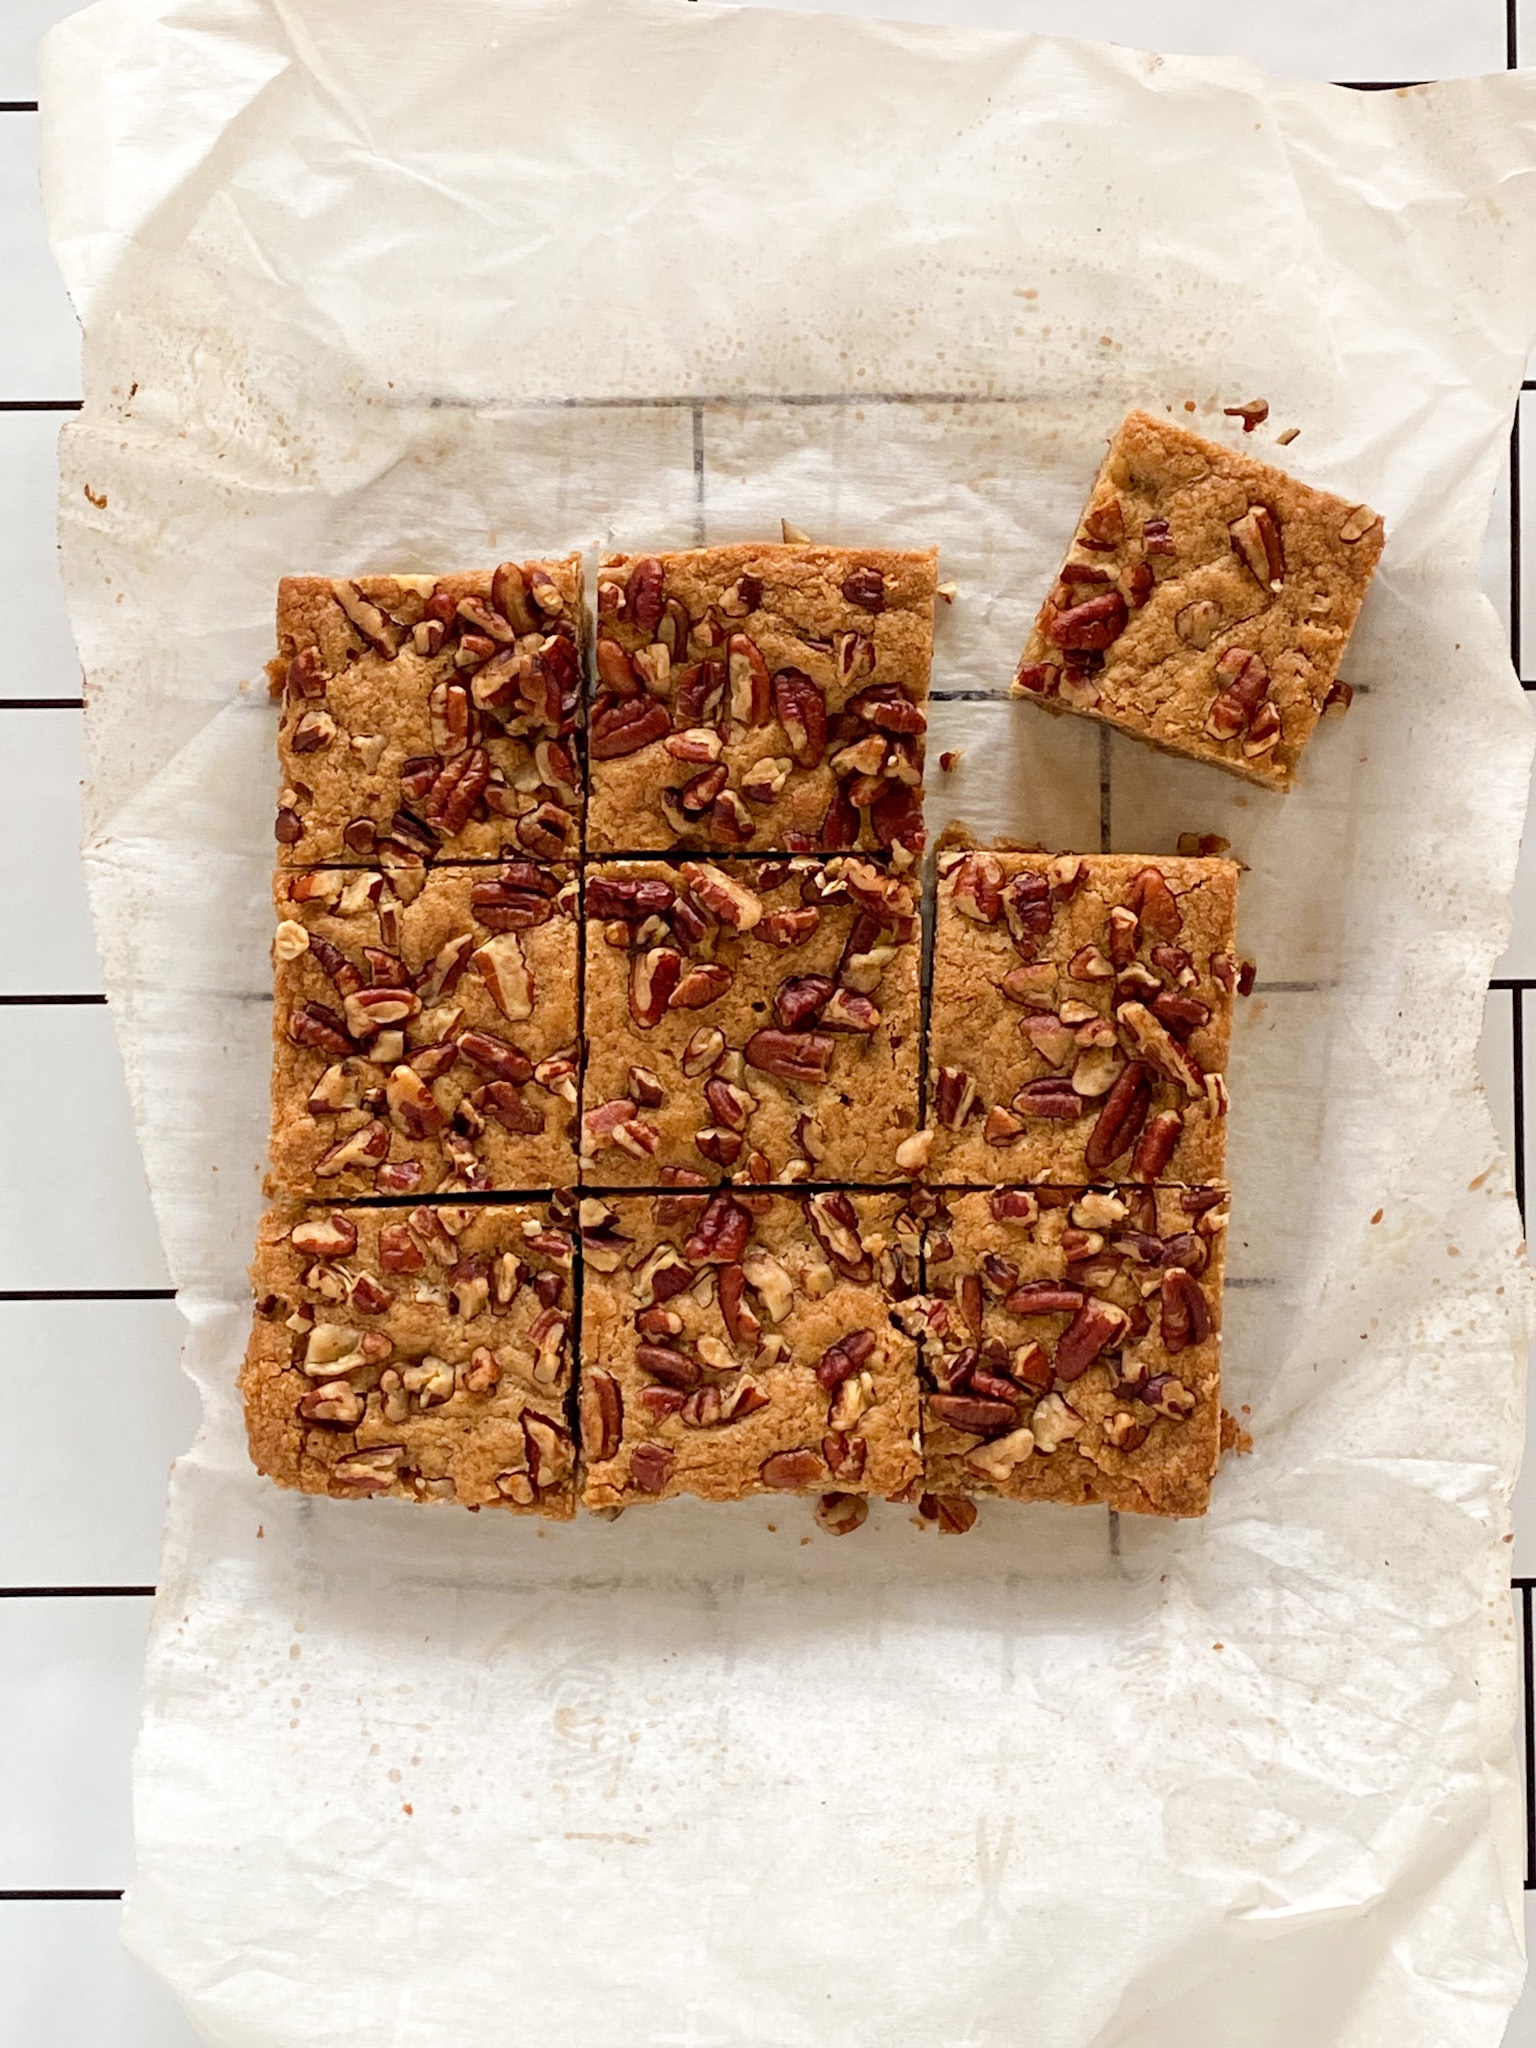 Pecan-covered blondies sit on a piece of parchment paper atop a white tiled surface.